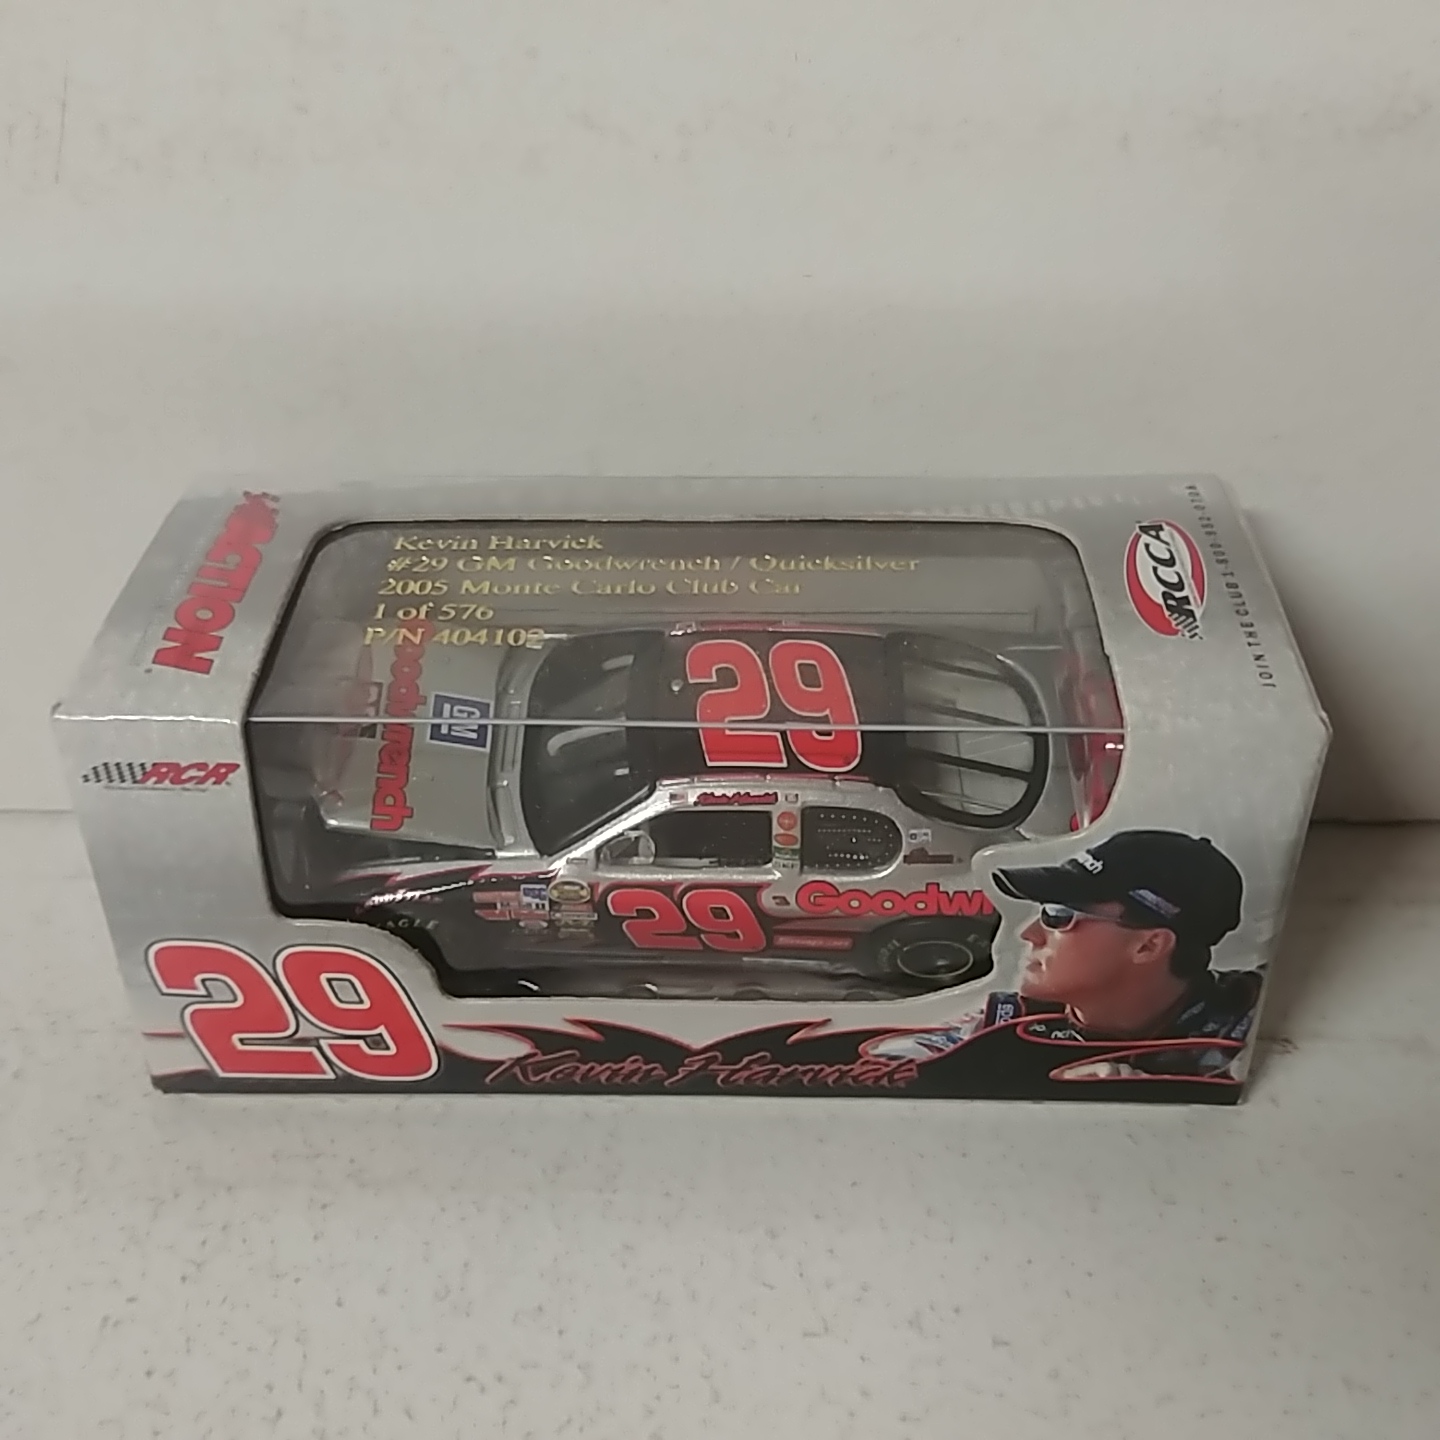 2005 Kevin Harvick 1/64th Goodwrench "Quicksilver" RCCA hood open car